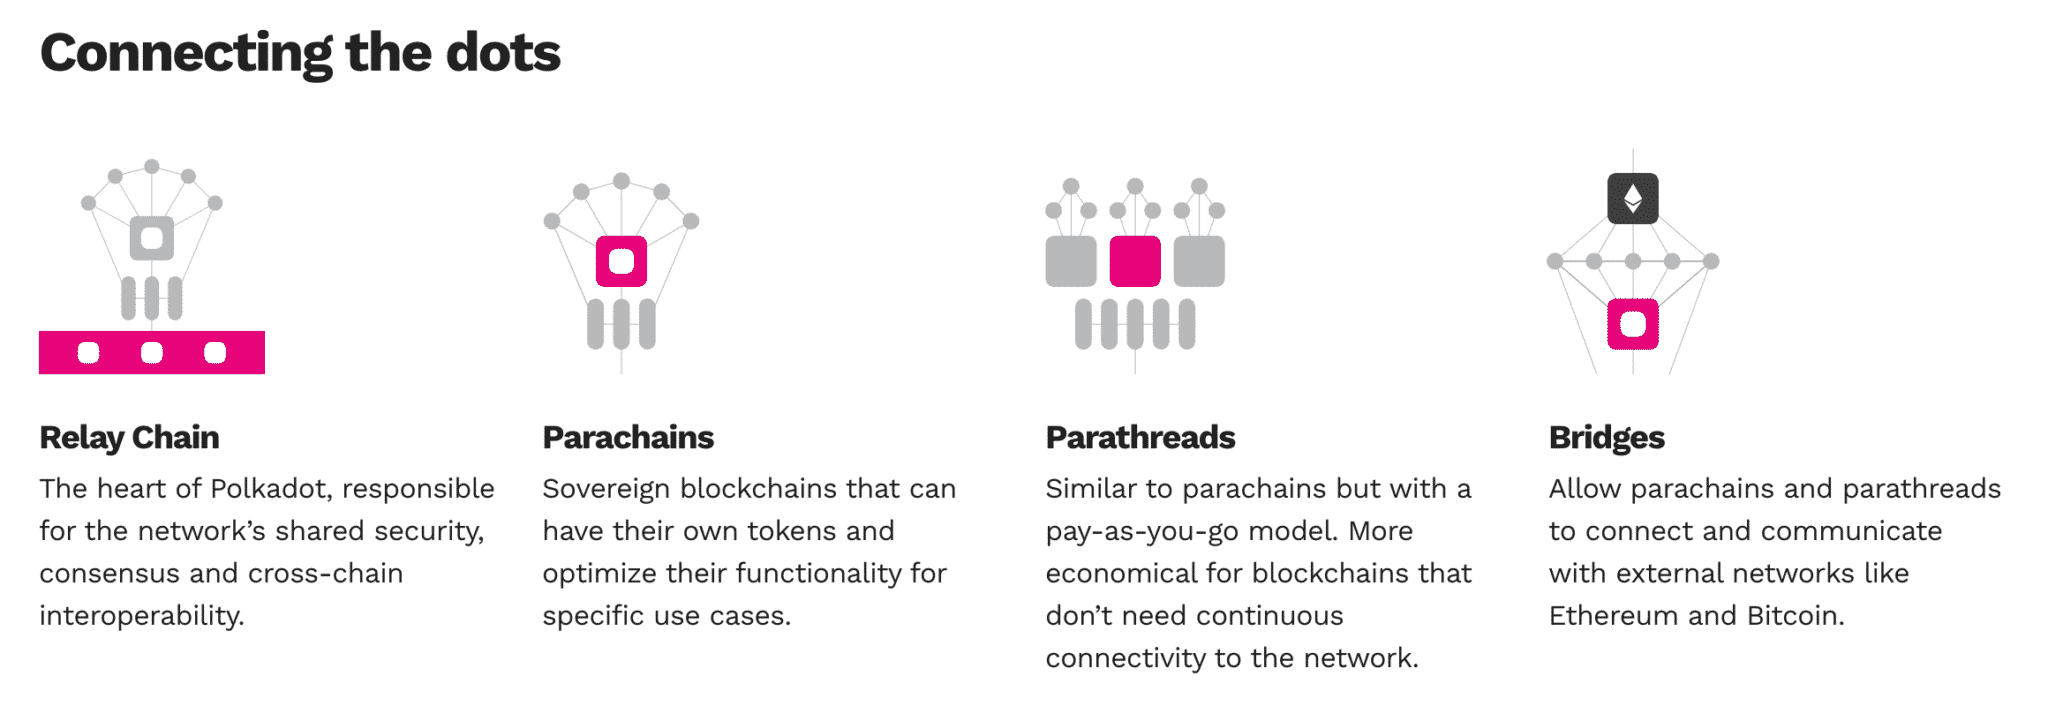 The Polkadot network in a nutshell